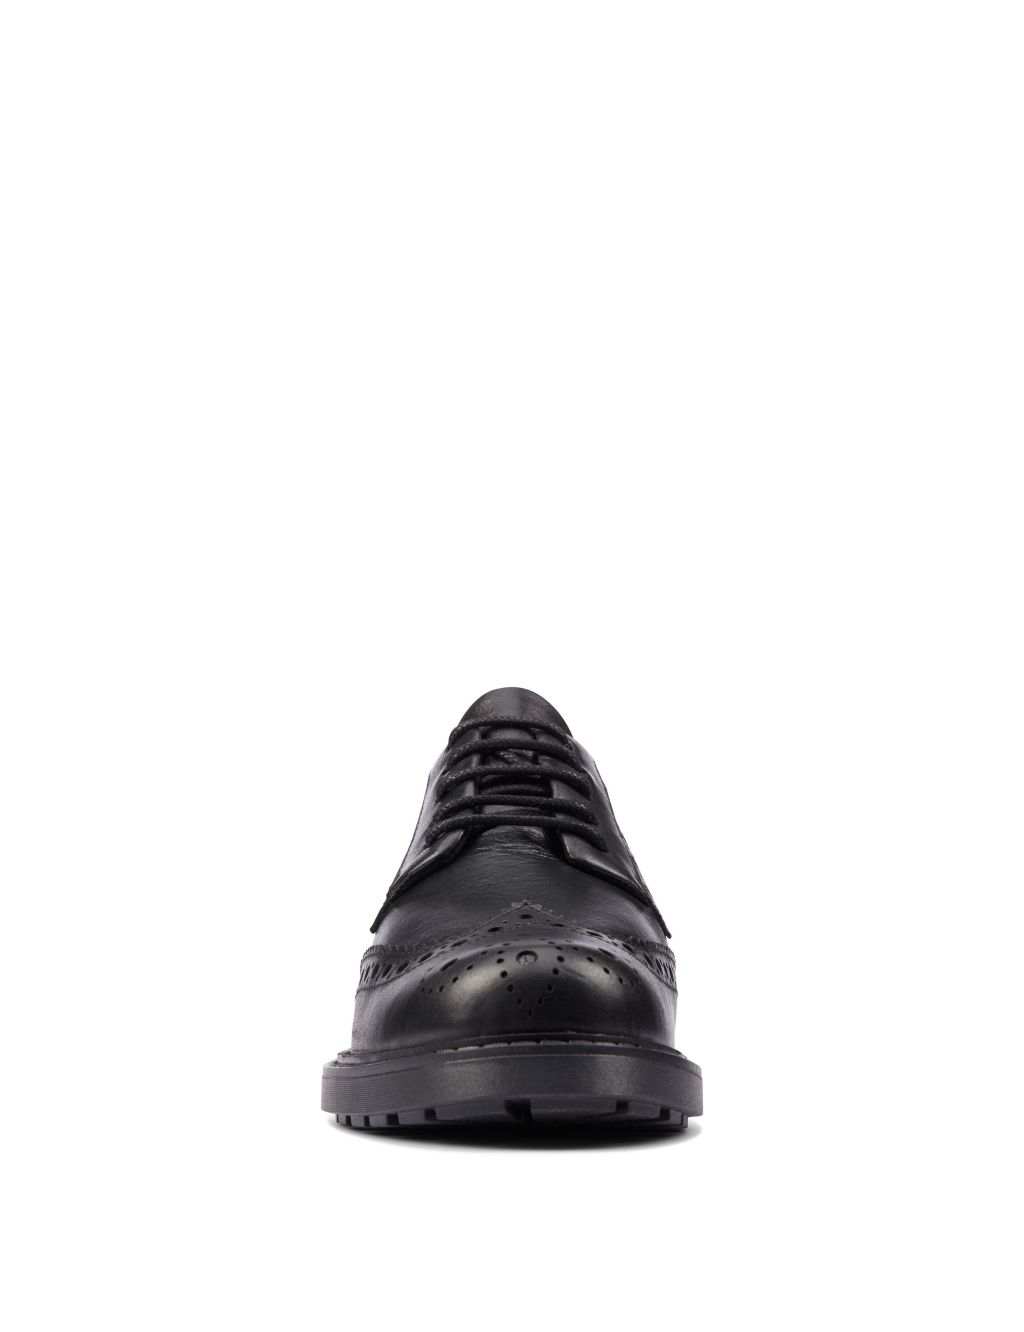 Leather Lace Up Brogues image 3